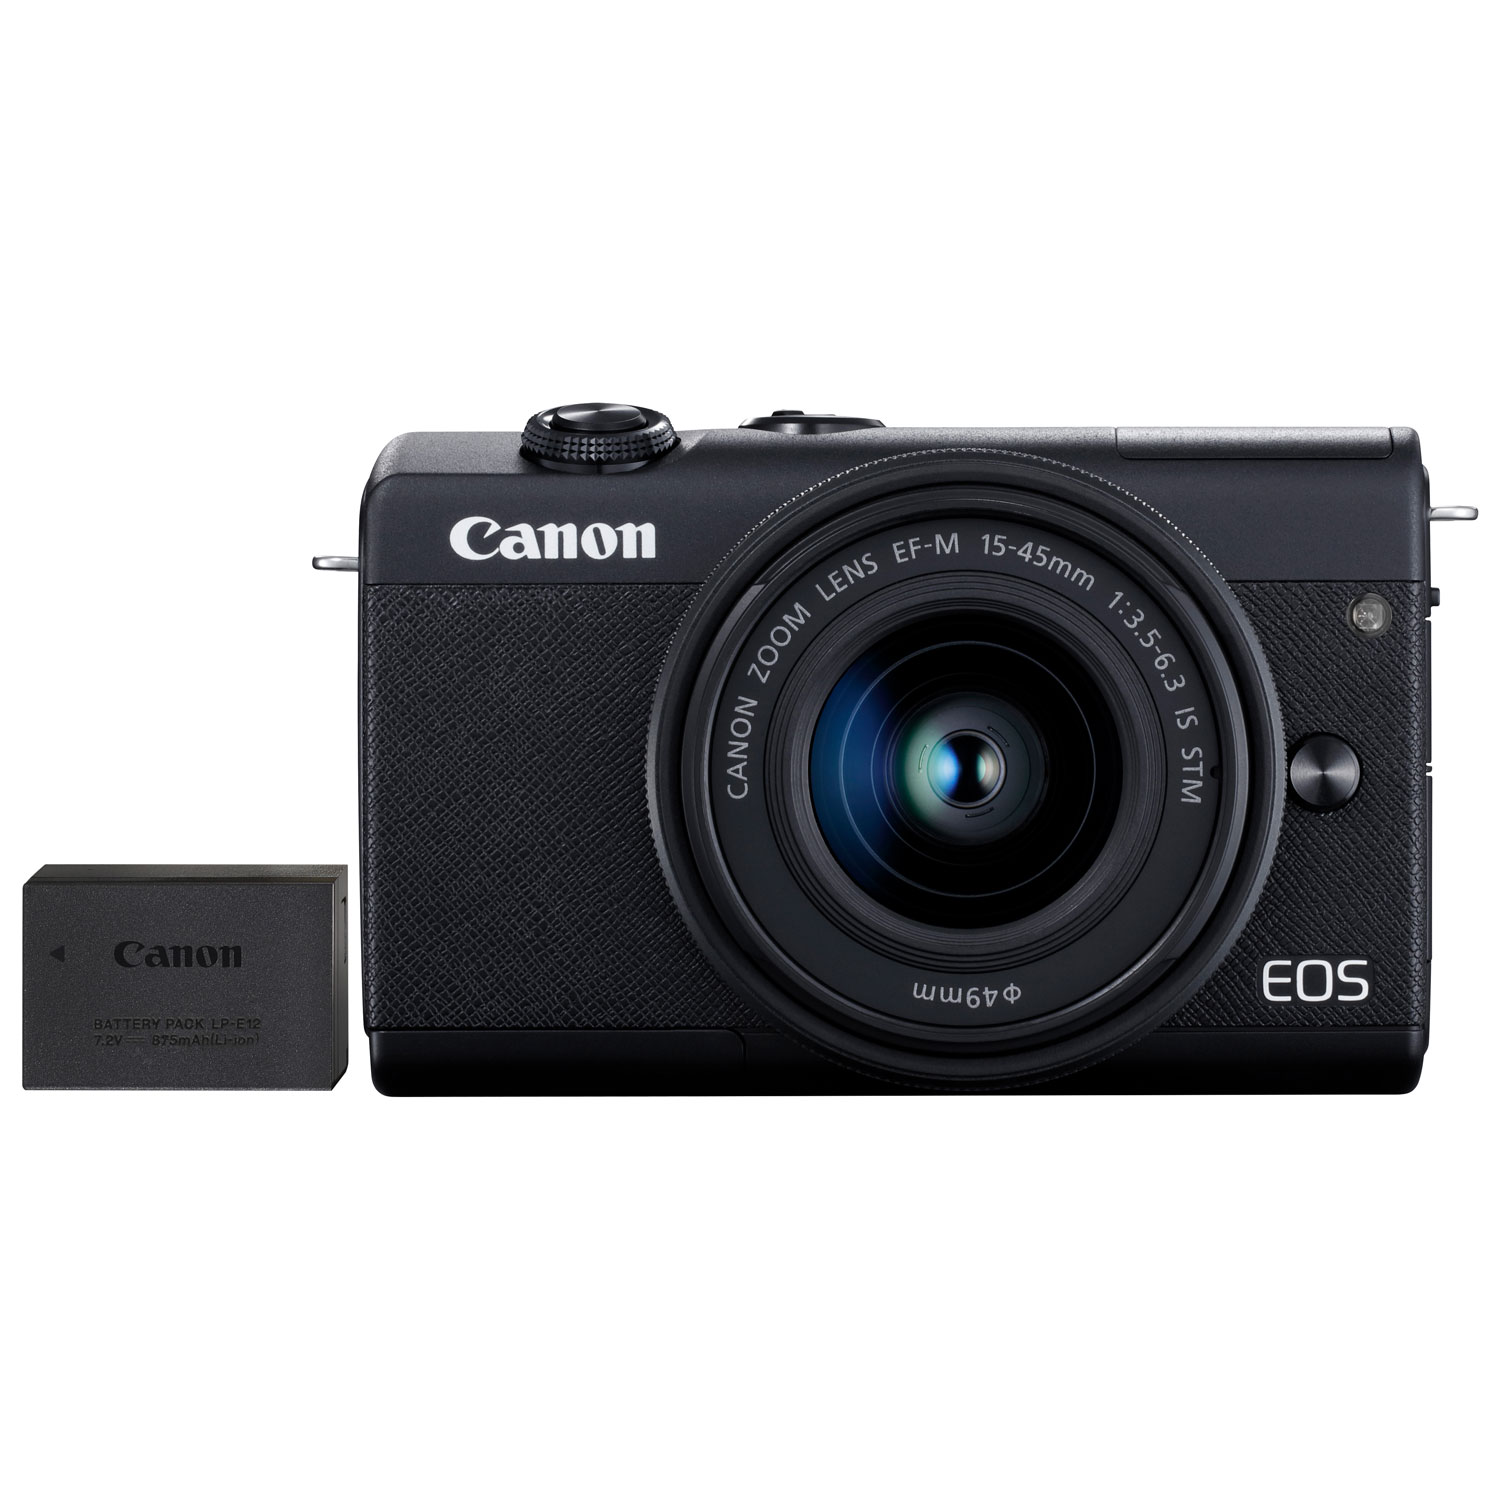 Canon EOS M200 Mirrorless Camera with 15-45mm IS STM Lens Kit & Extra Battery Pack - Only at Best Buy